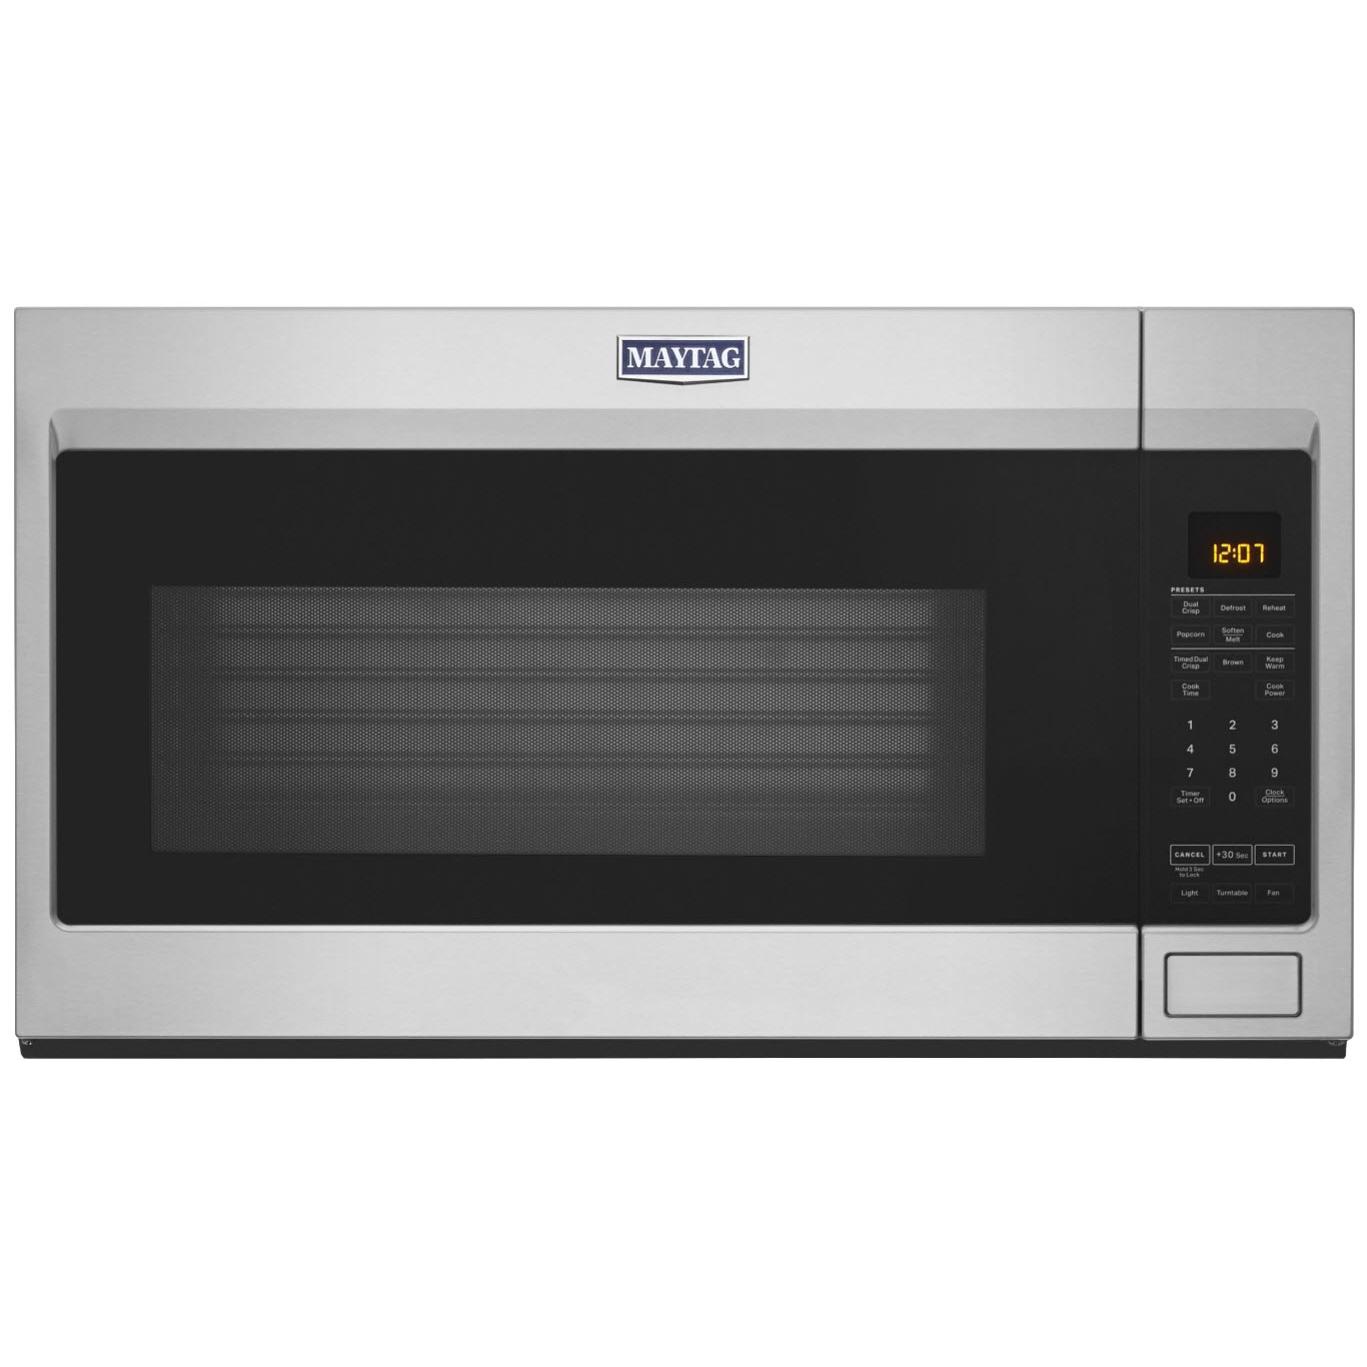 Maytag 30-inch, 1.9 cu.ft. Over-the-Range Microwave Oven with Stainless Steel Interior MMV4207JZ